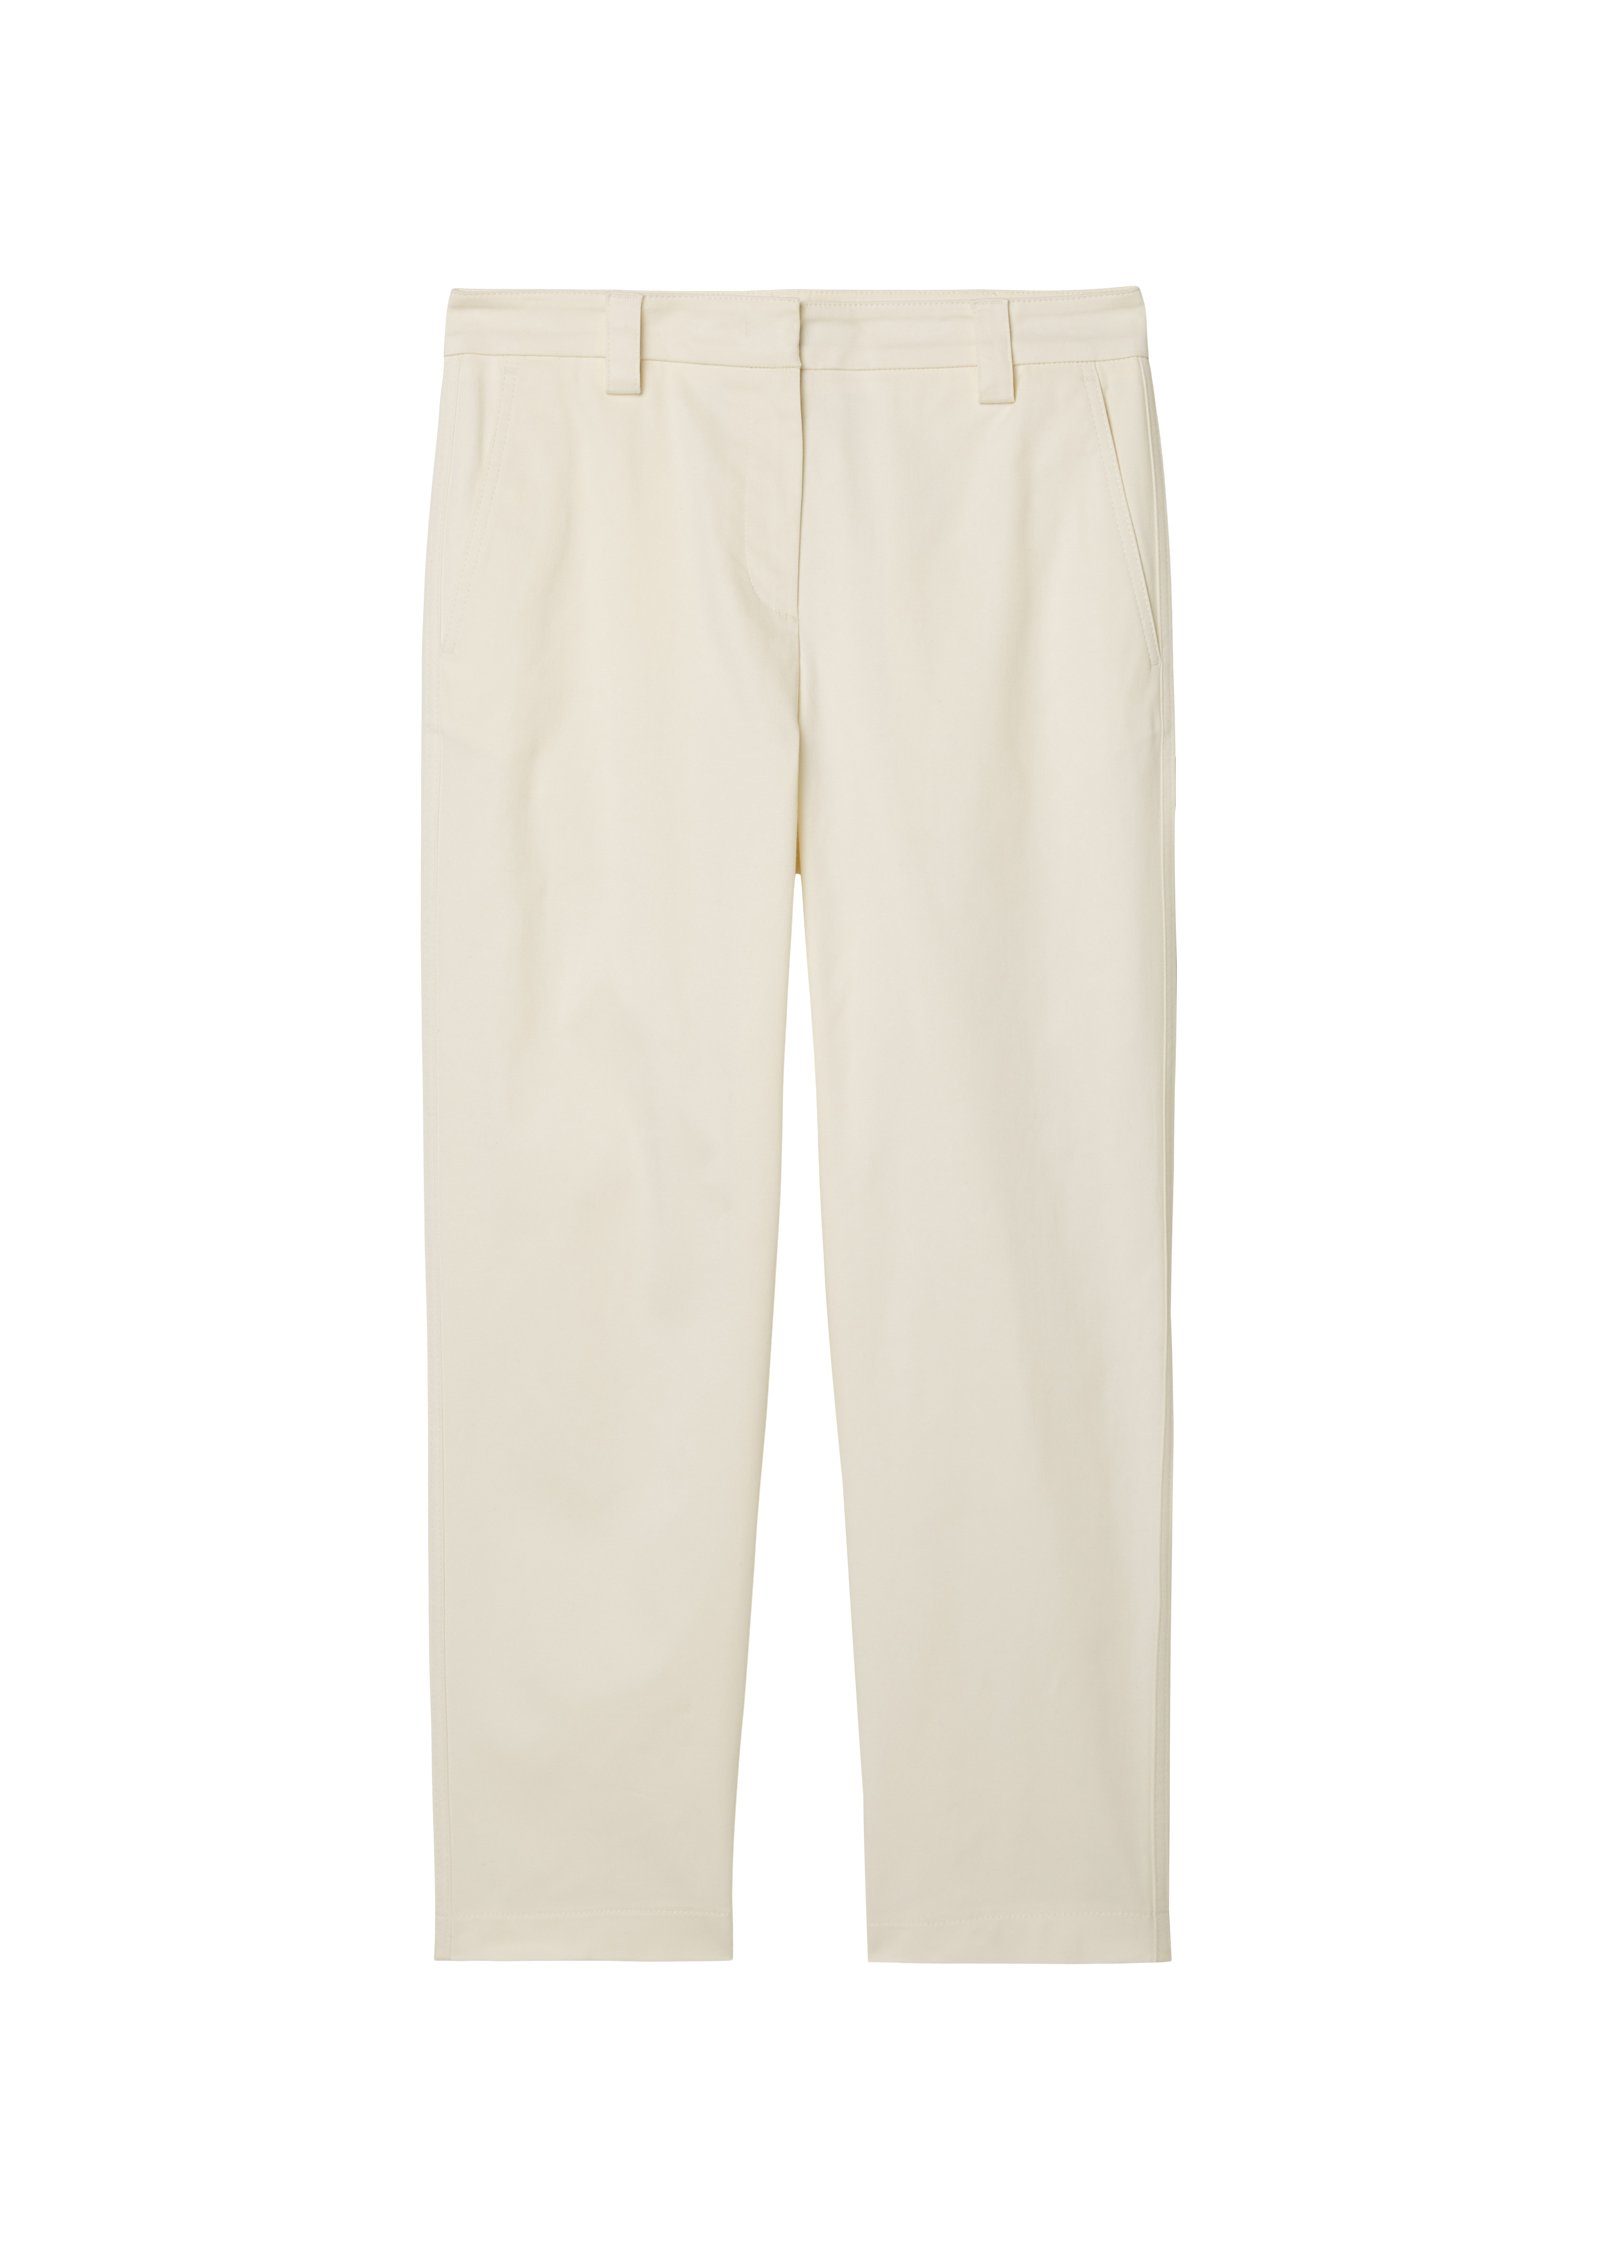 Marc O'Polo 7/8-Hose Pants, modern pocket tapered chino im sand leg, modernen welt high rise, Chino-Style style, chalky